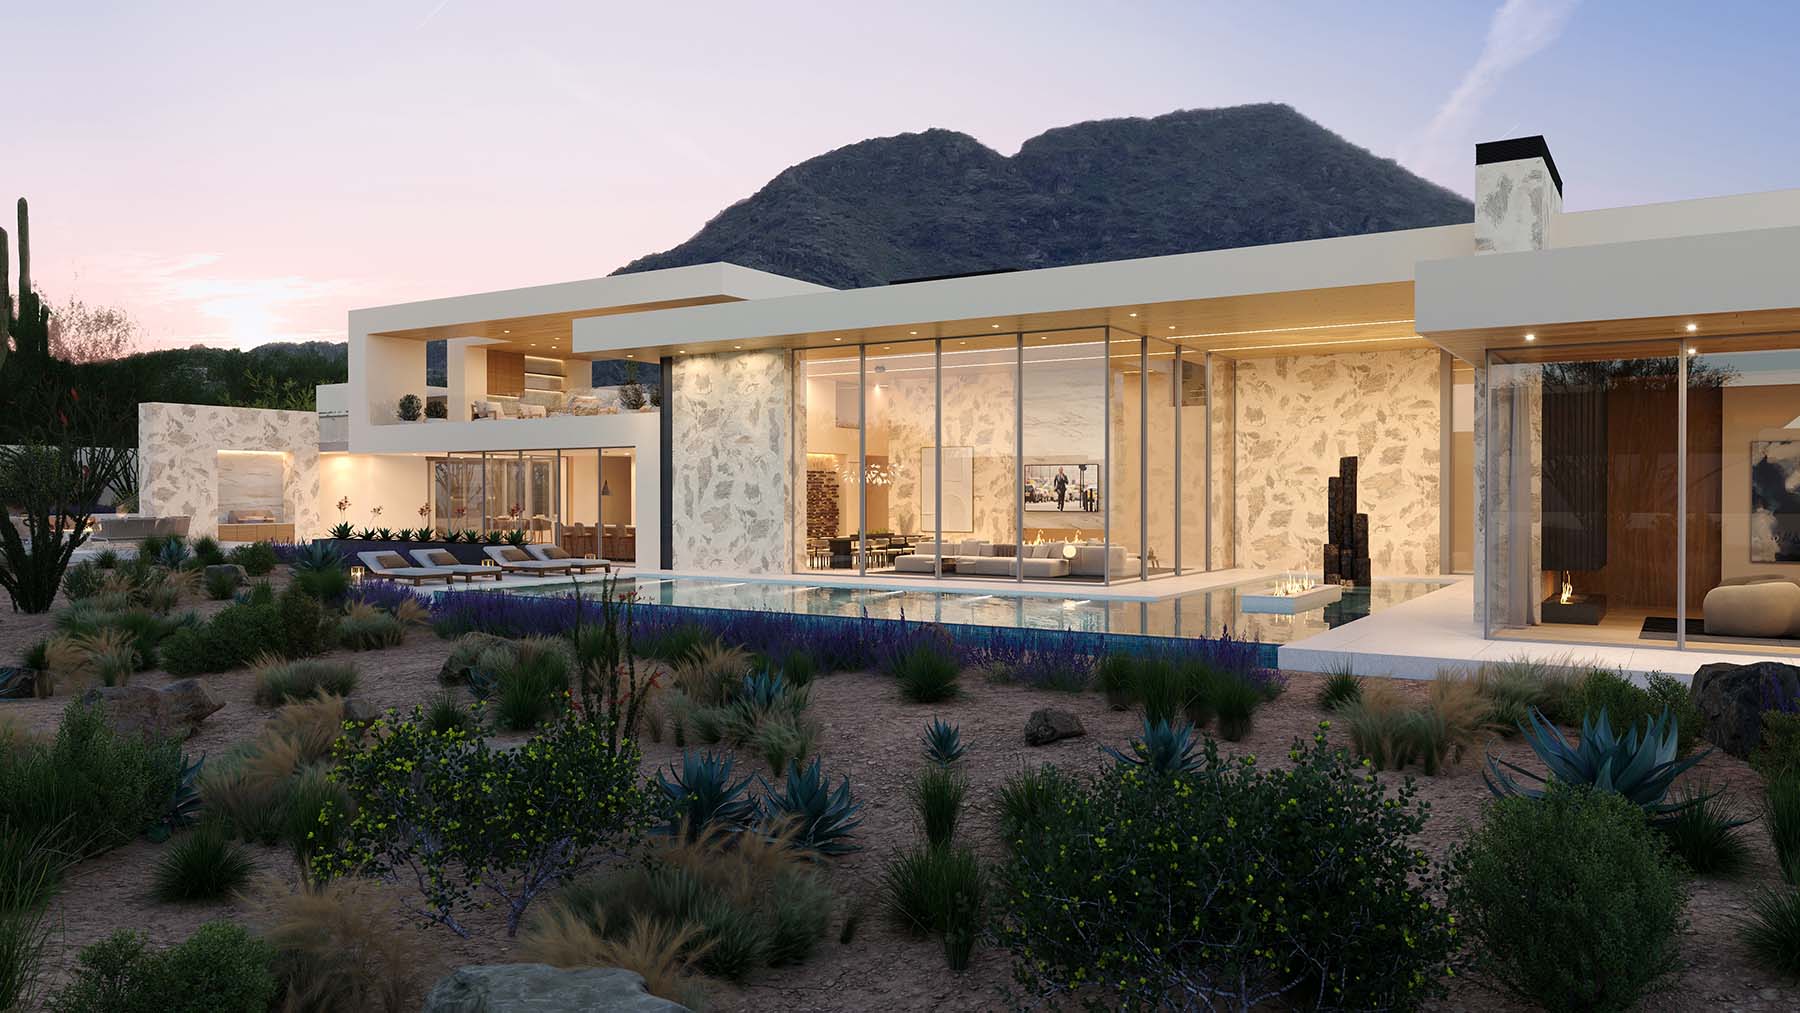 Silver Sky Lot 11, an on-the-boards luxury home in the Silver Sky development in Paradise Valley, AZ